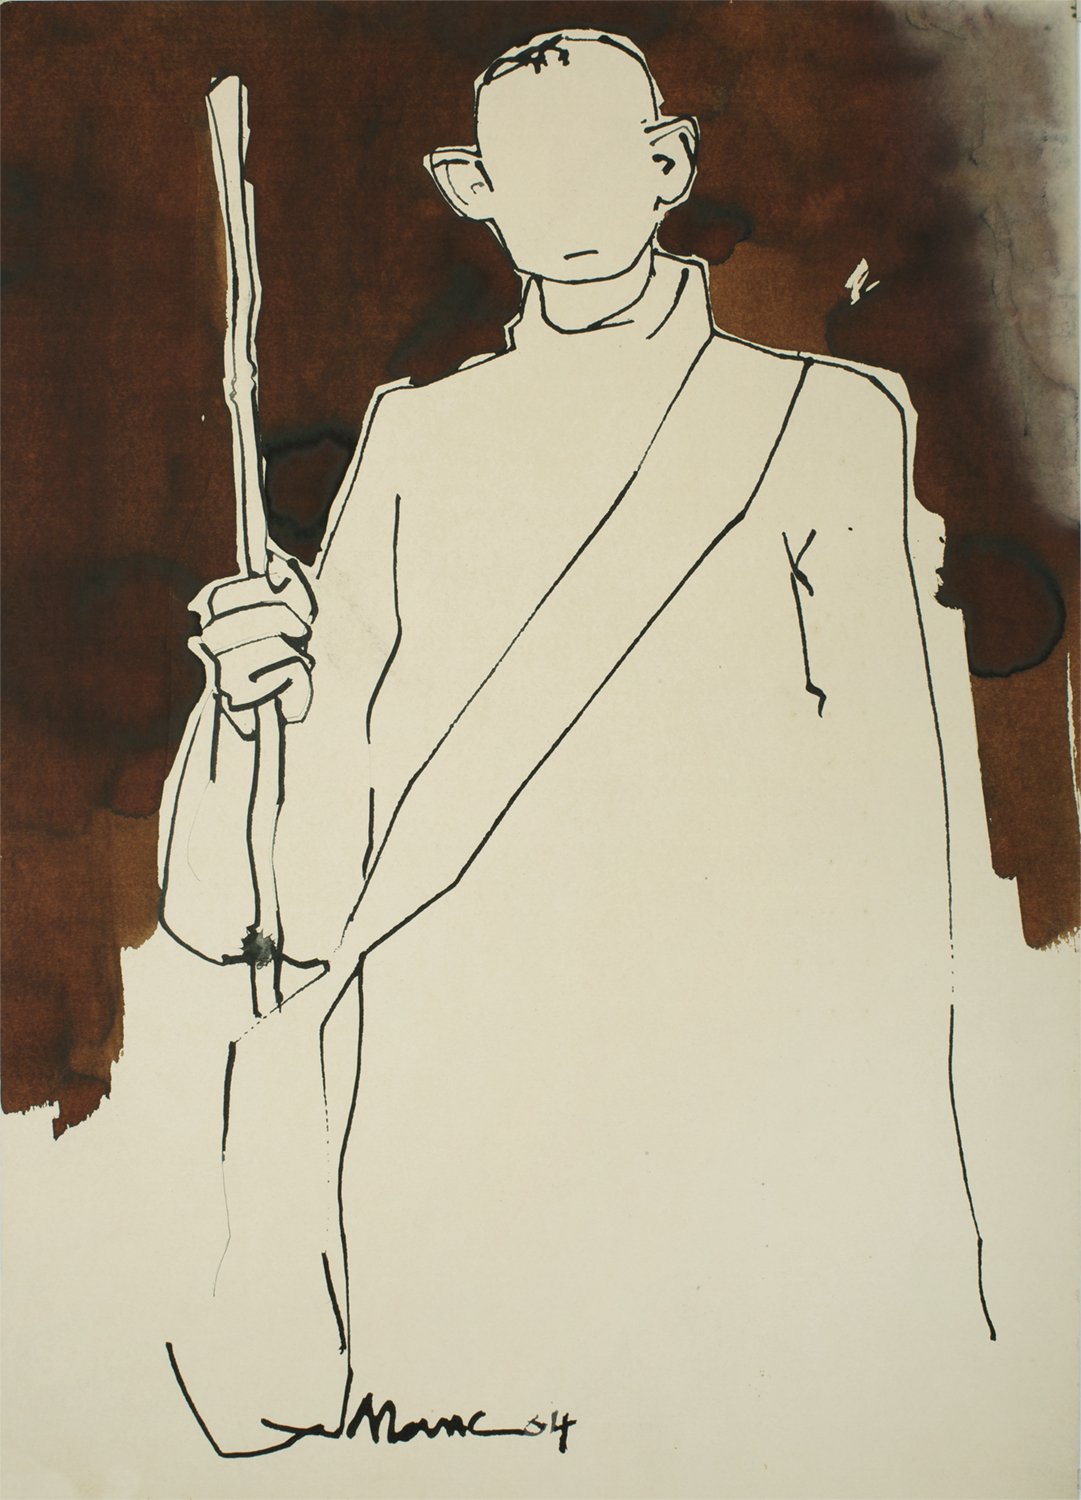 Gandhi I|S. Mark Rathinaraj- Pen and Ink on Paper, , 22 x 16 inches